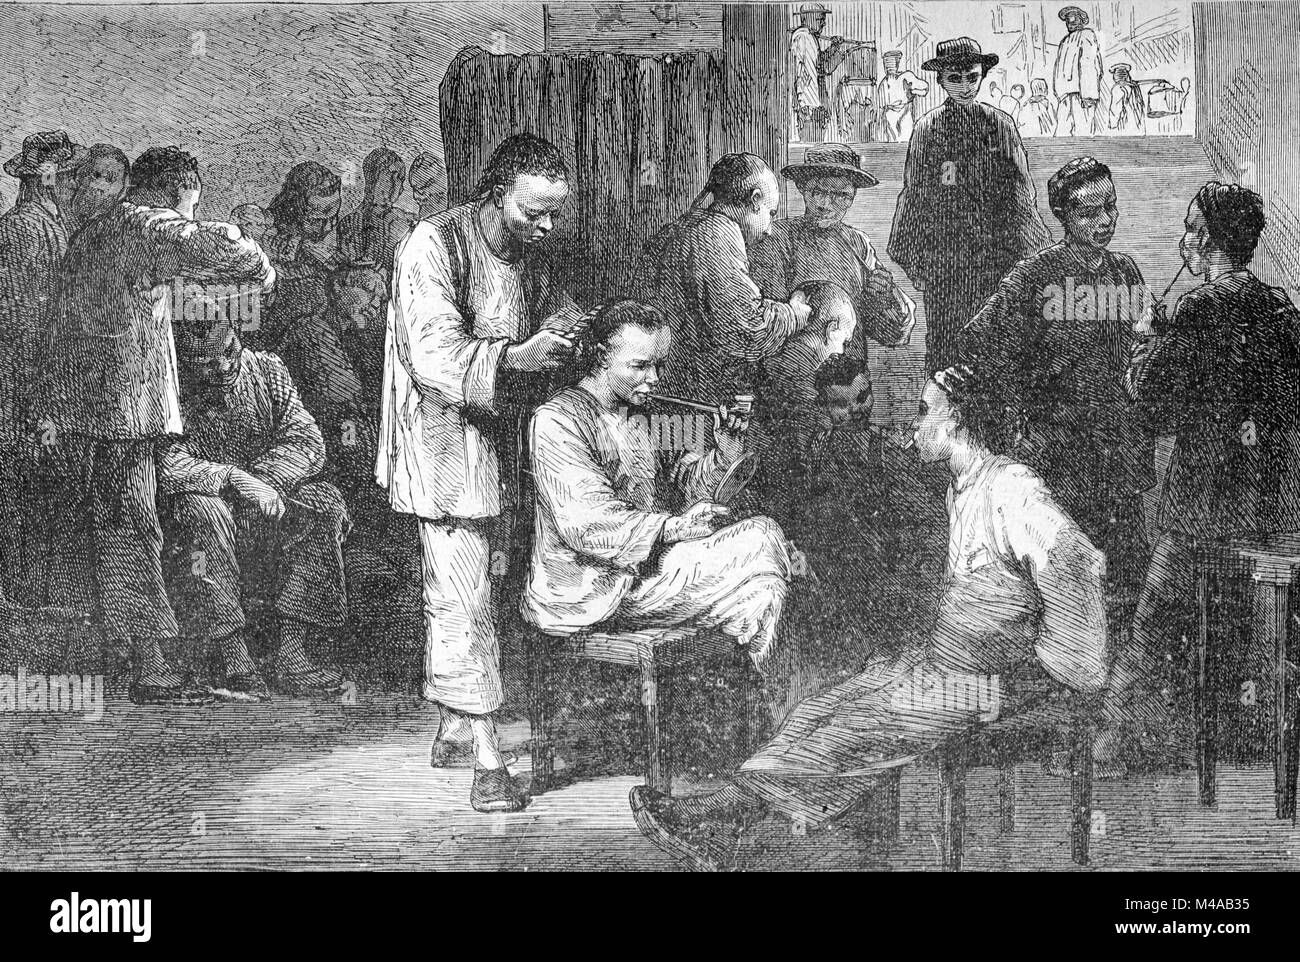 Chinese Barber or Barbershop in Chinese Immigrant Community, San Francisco, California, United States (Engraving, 1880) Stock Photo